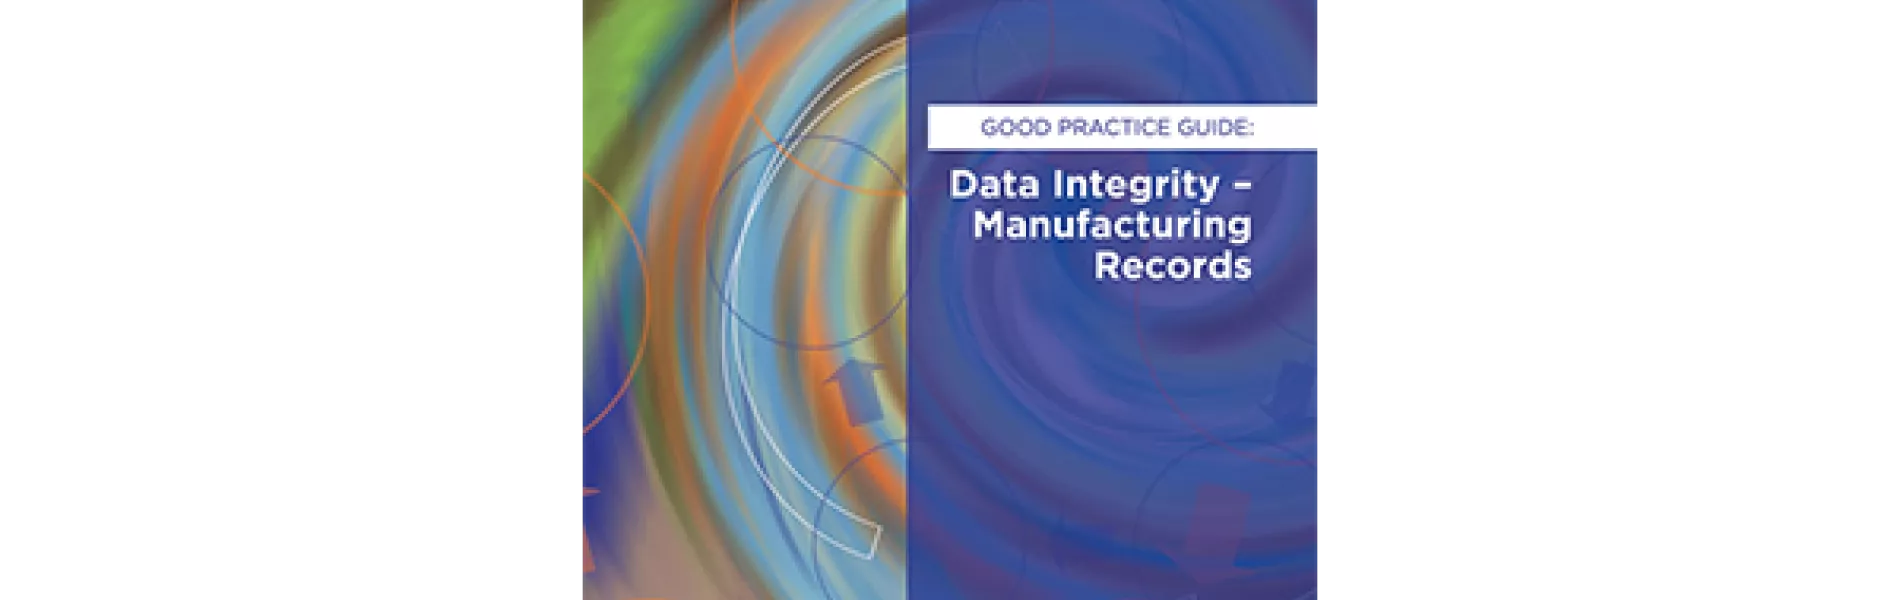 GAMP RDI Good Practice Guide: Data Integrity - Manufacturing Records